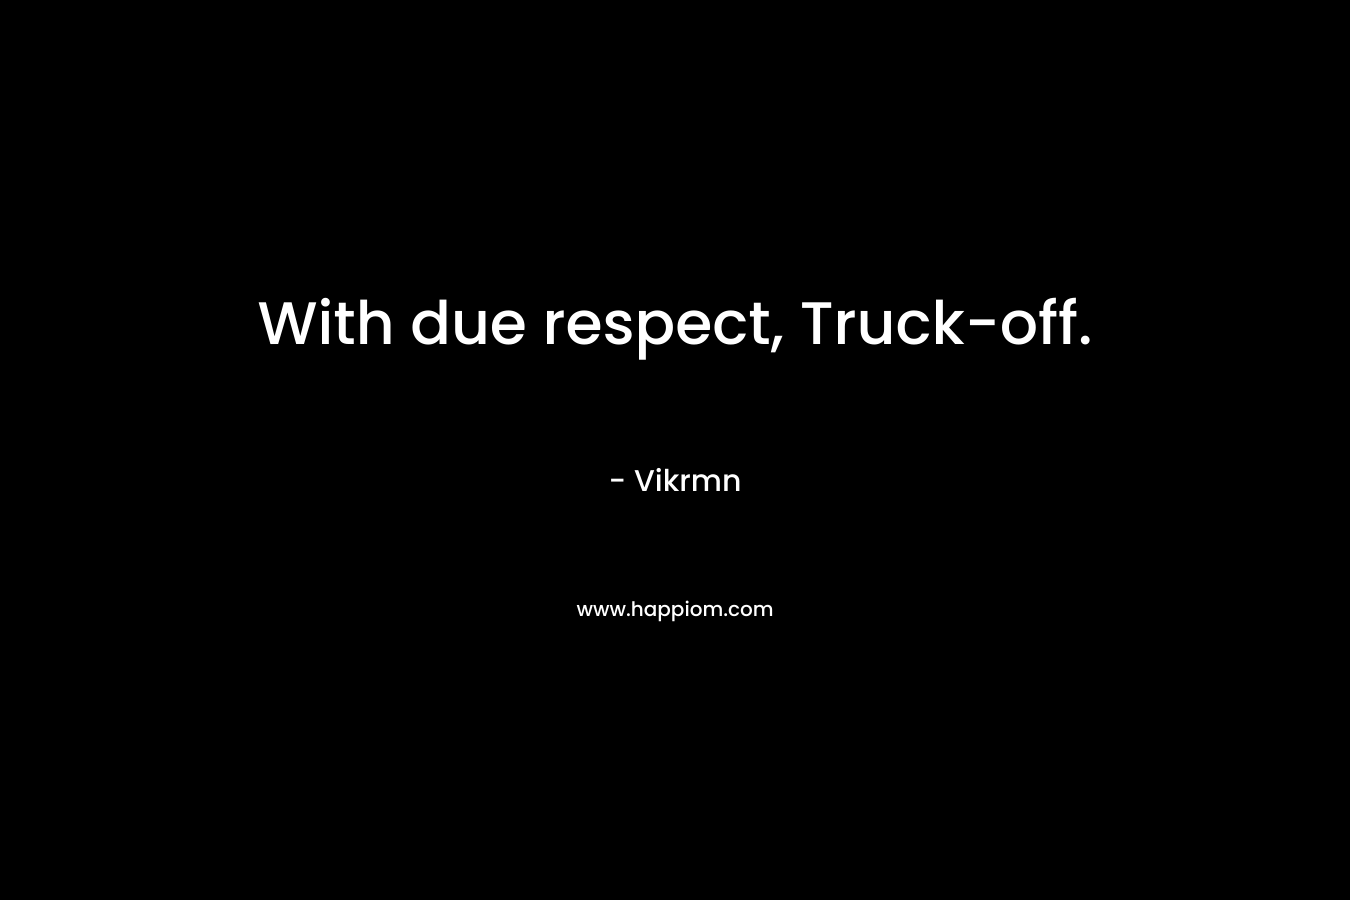 With due respect, Truck-off.